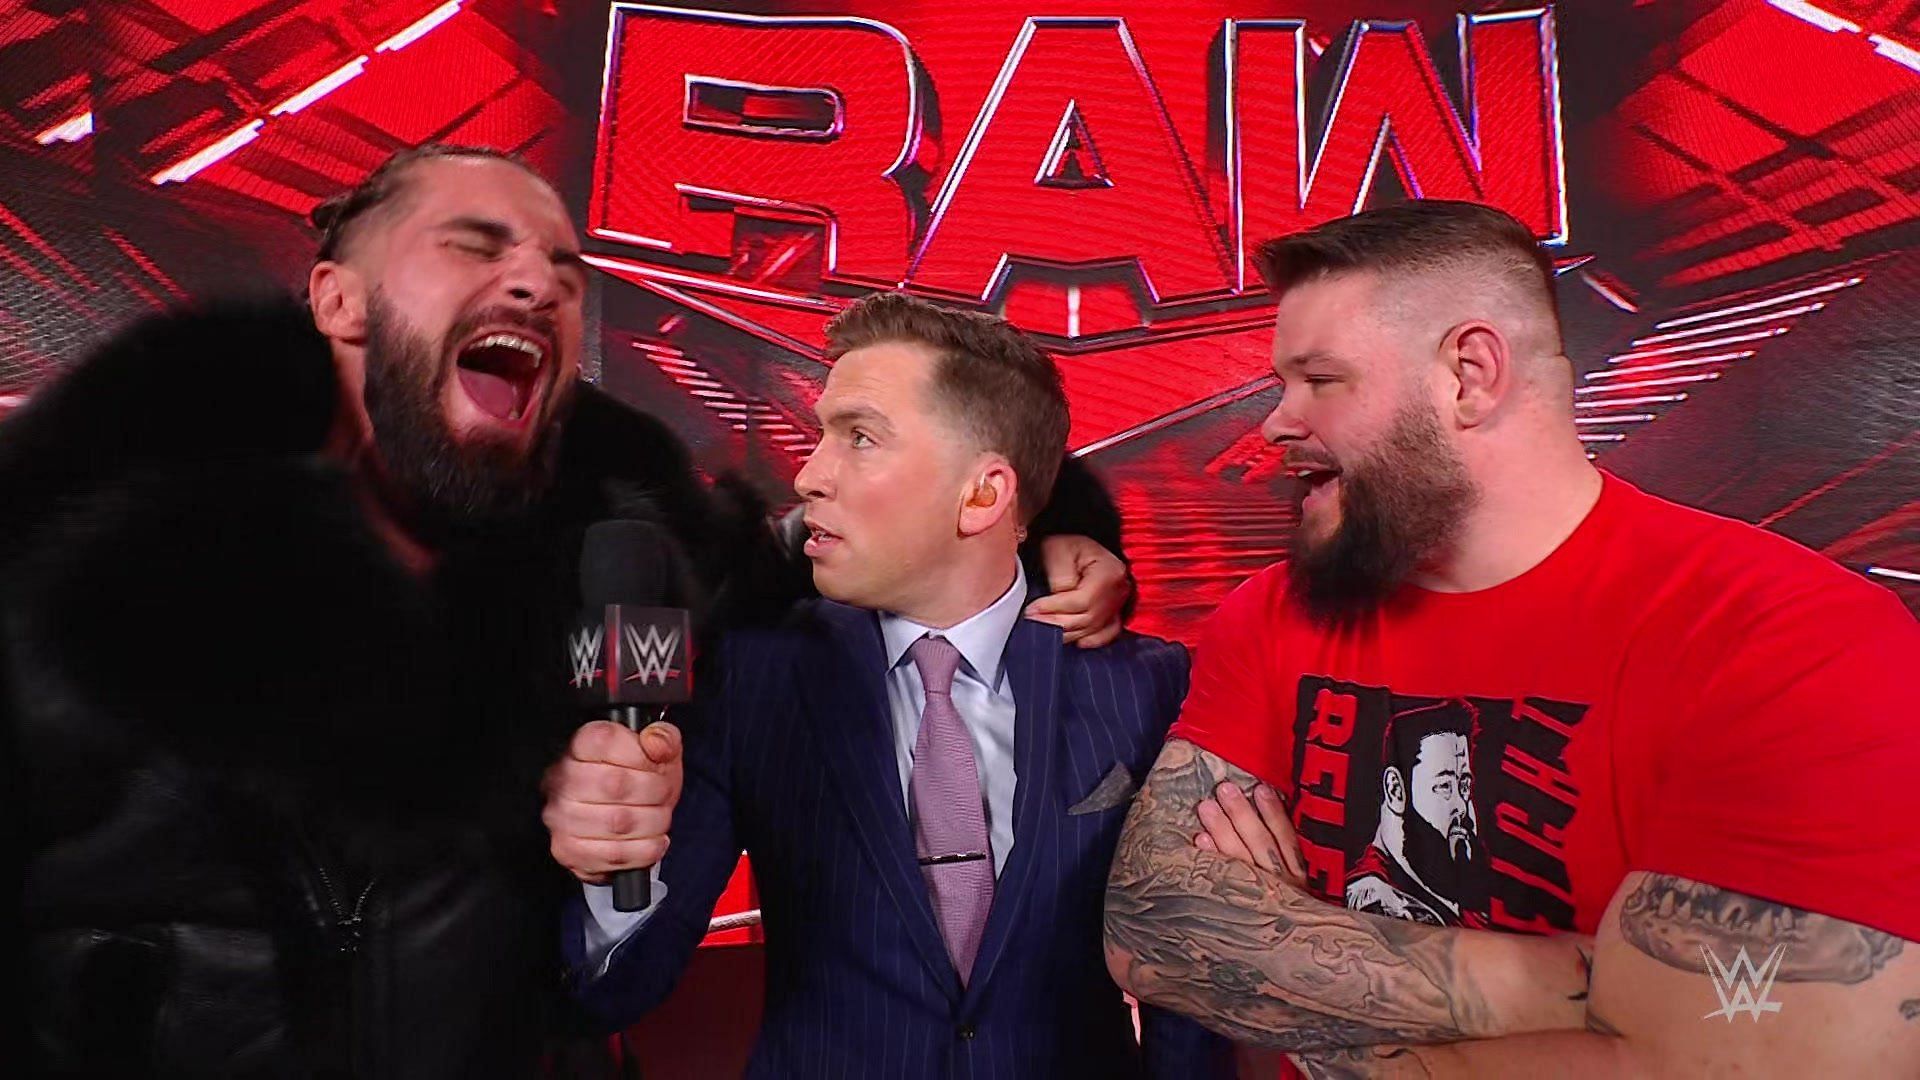 Seth Rollins, Kevin Patrick, and Kevin Owens